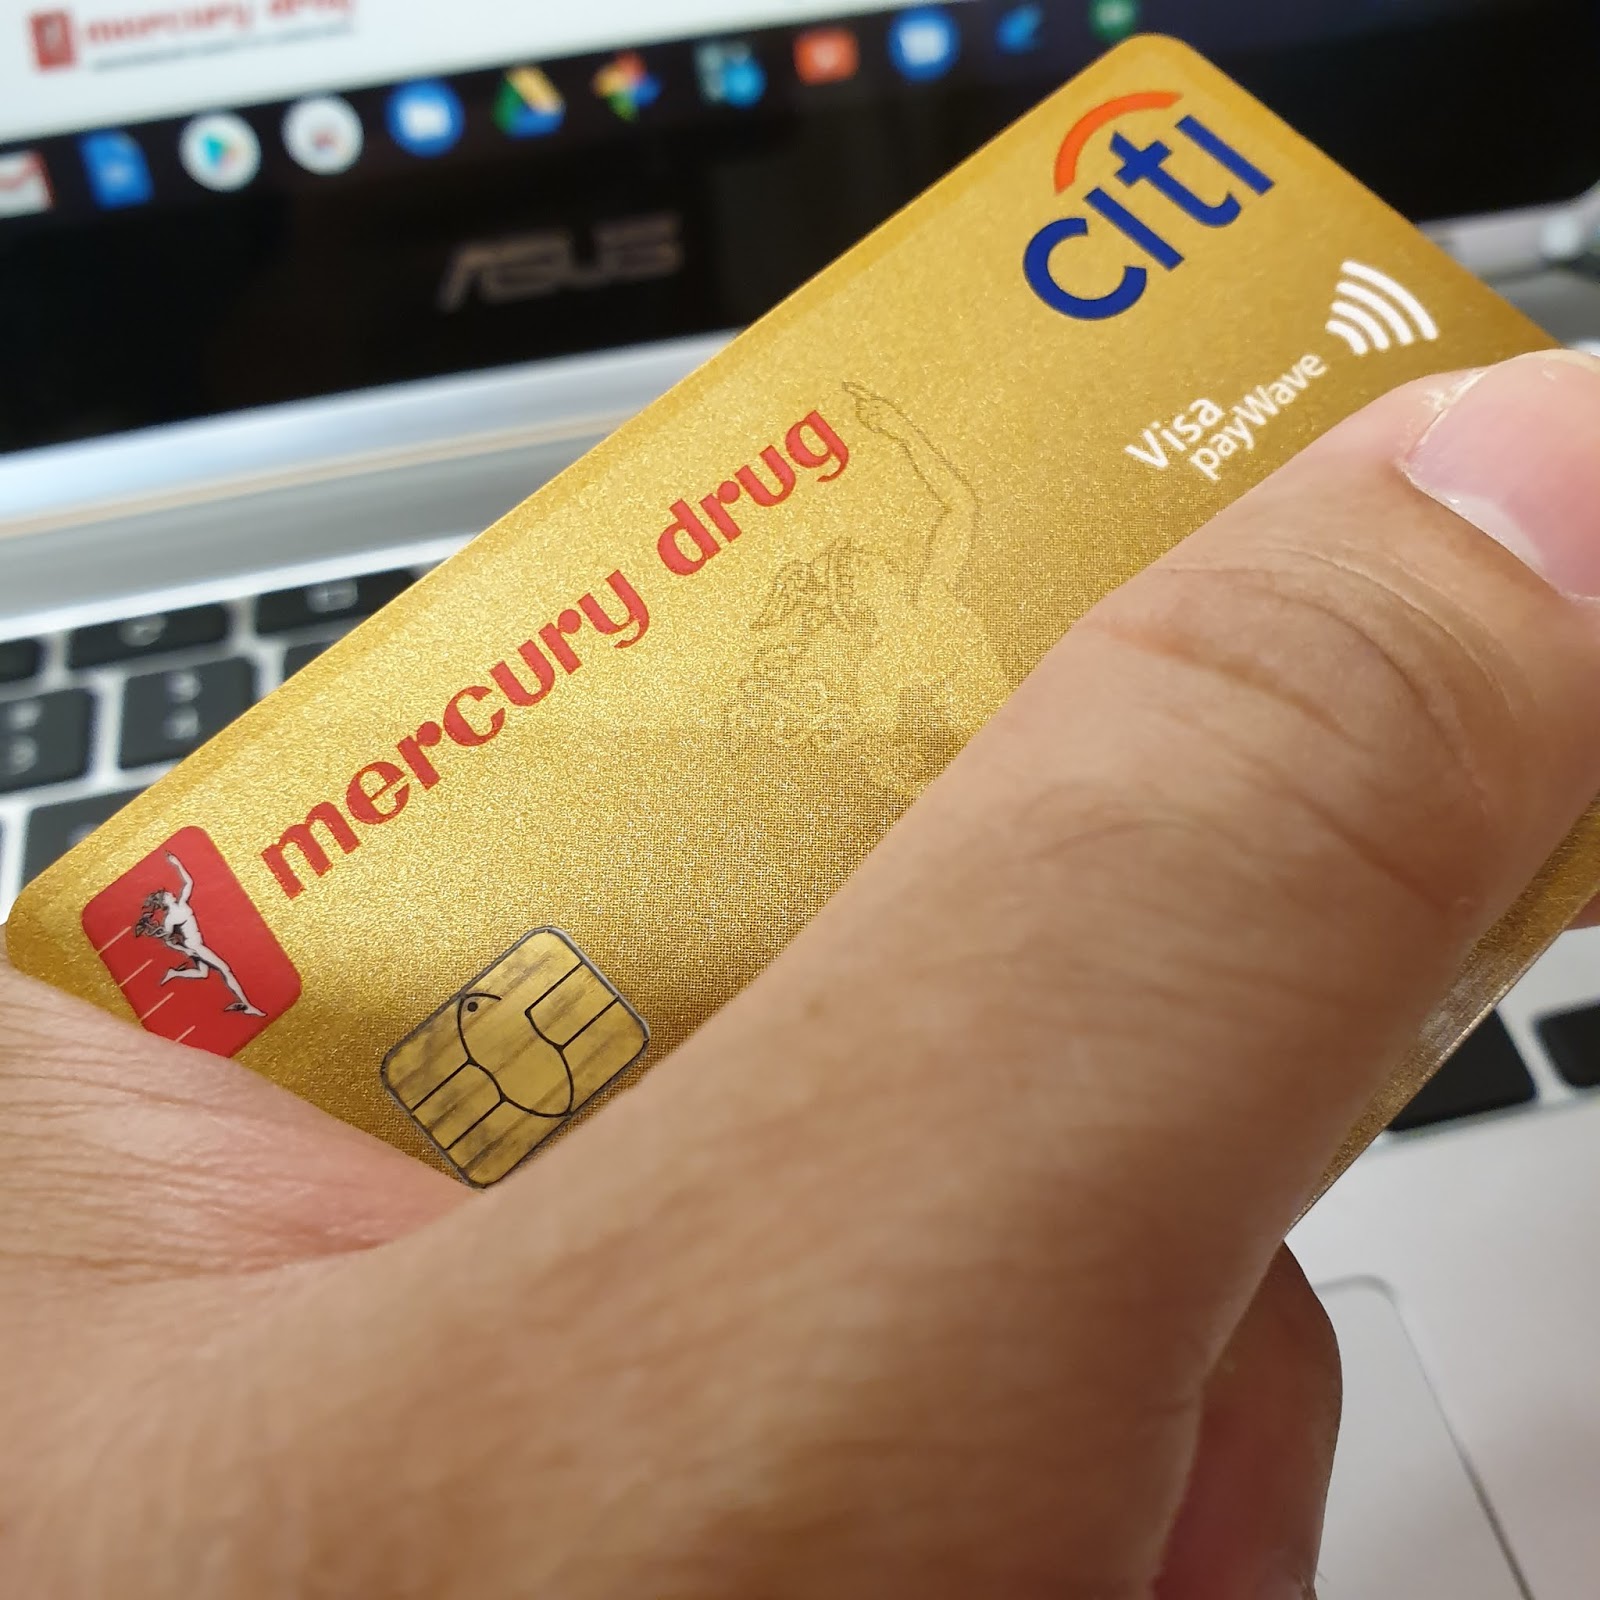 citibank-credit-cards-in-philippines-review-cash-mart